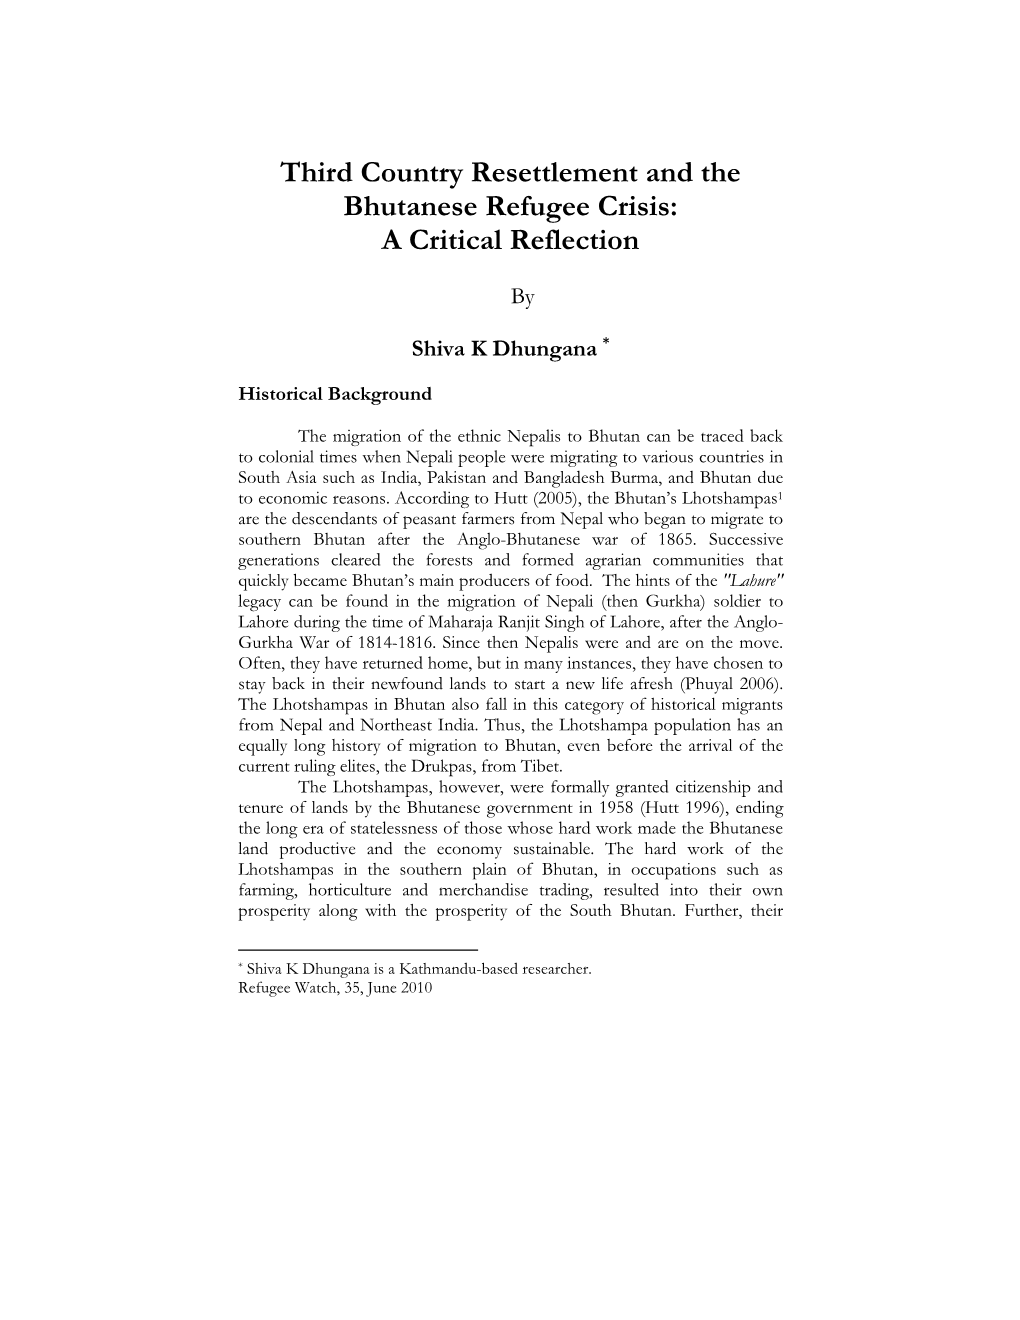 Third Country Resettlement and the Bhutanese Refugee Crisis: a Critical Reflection